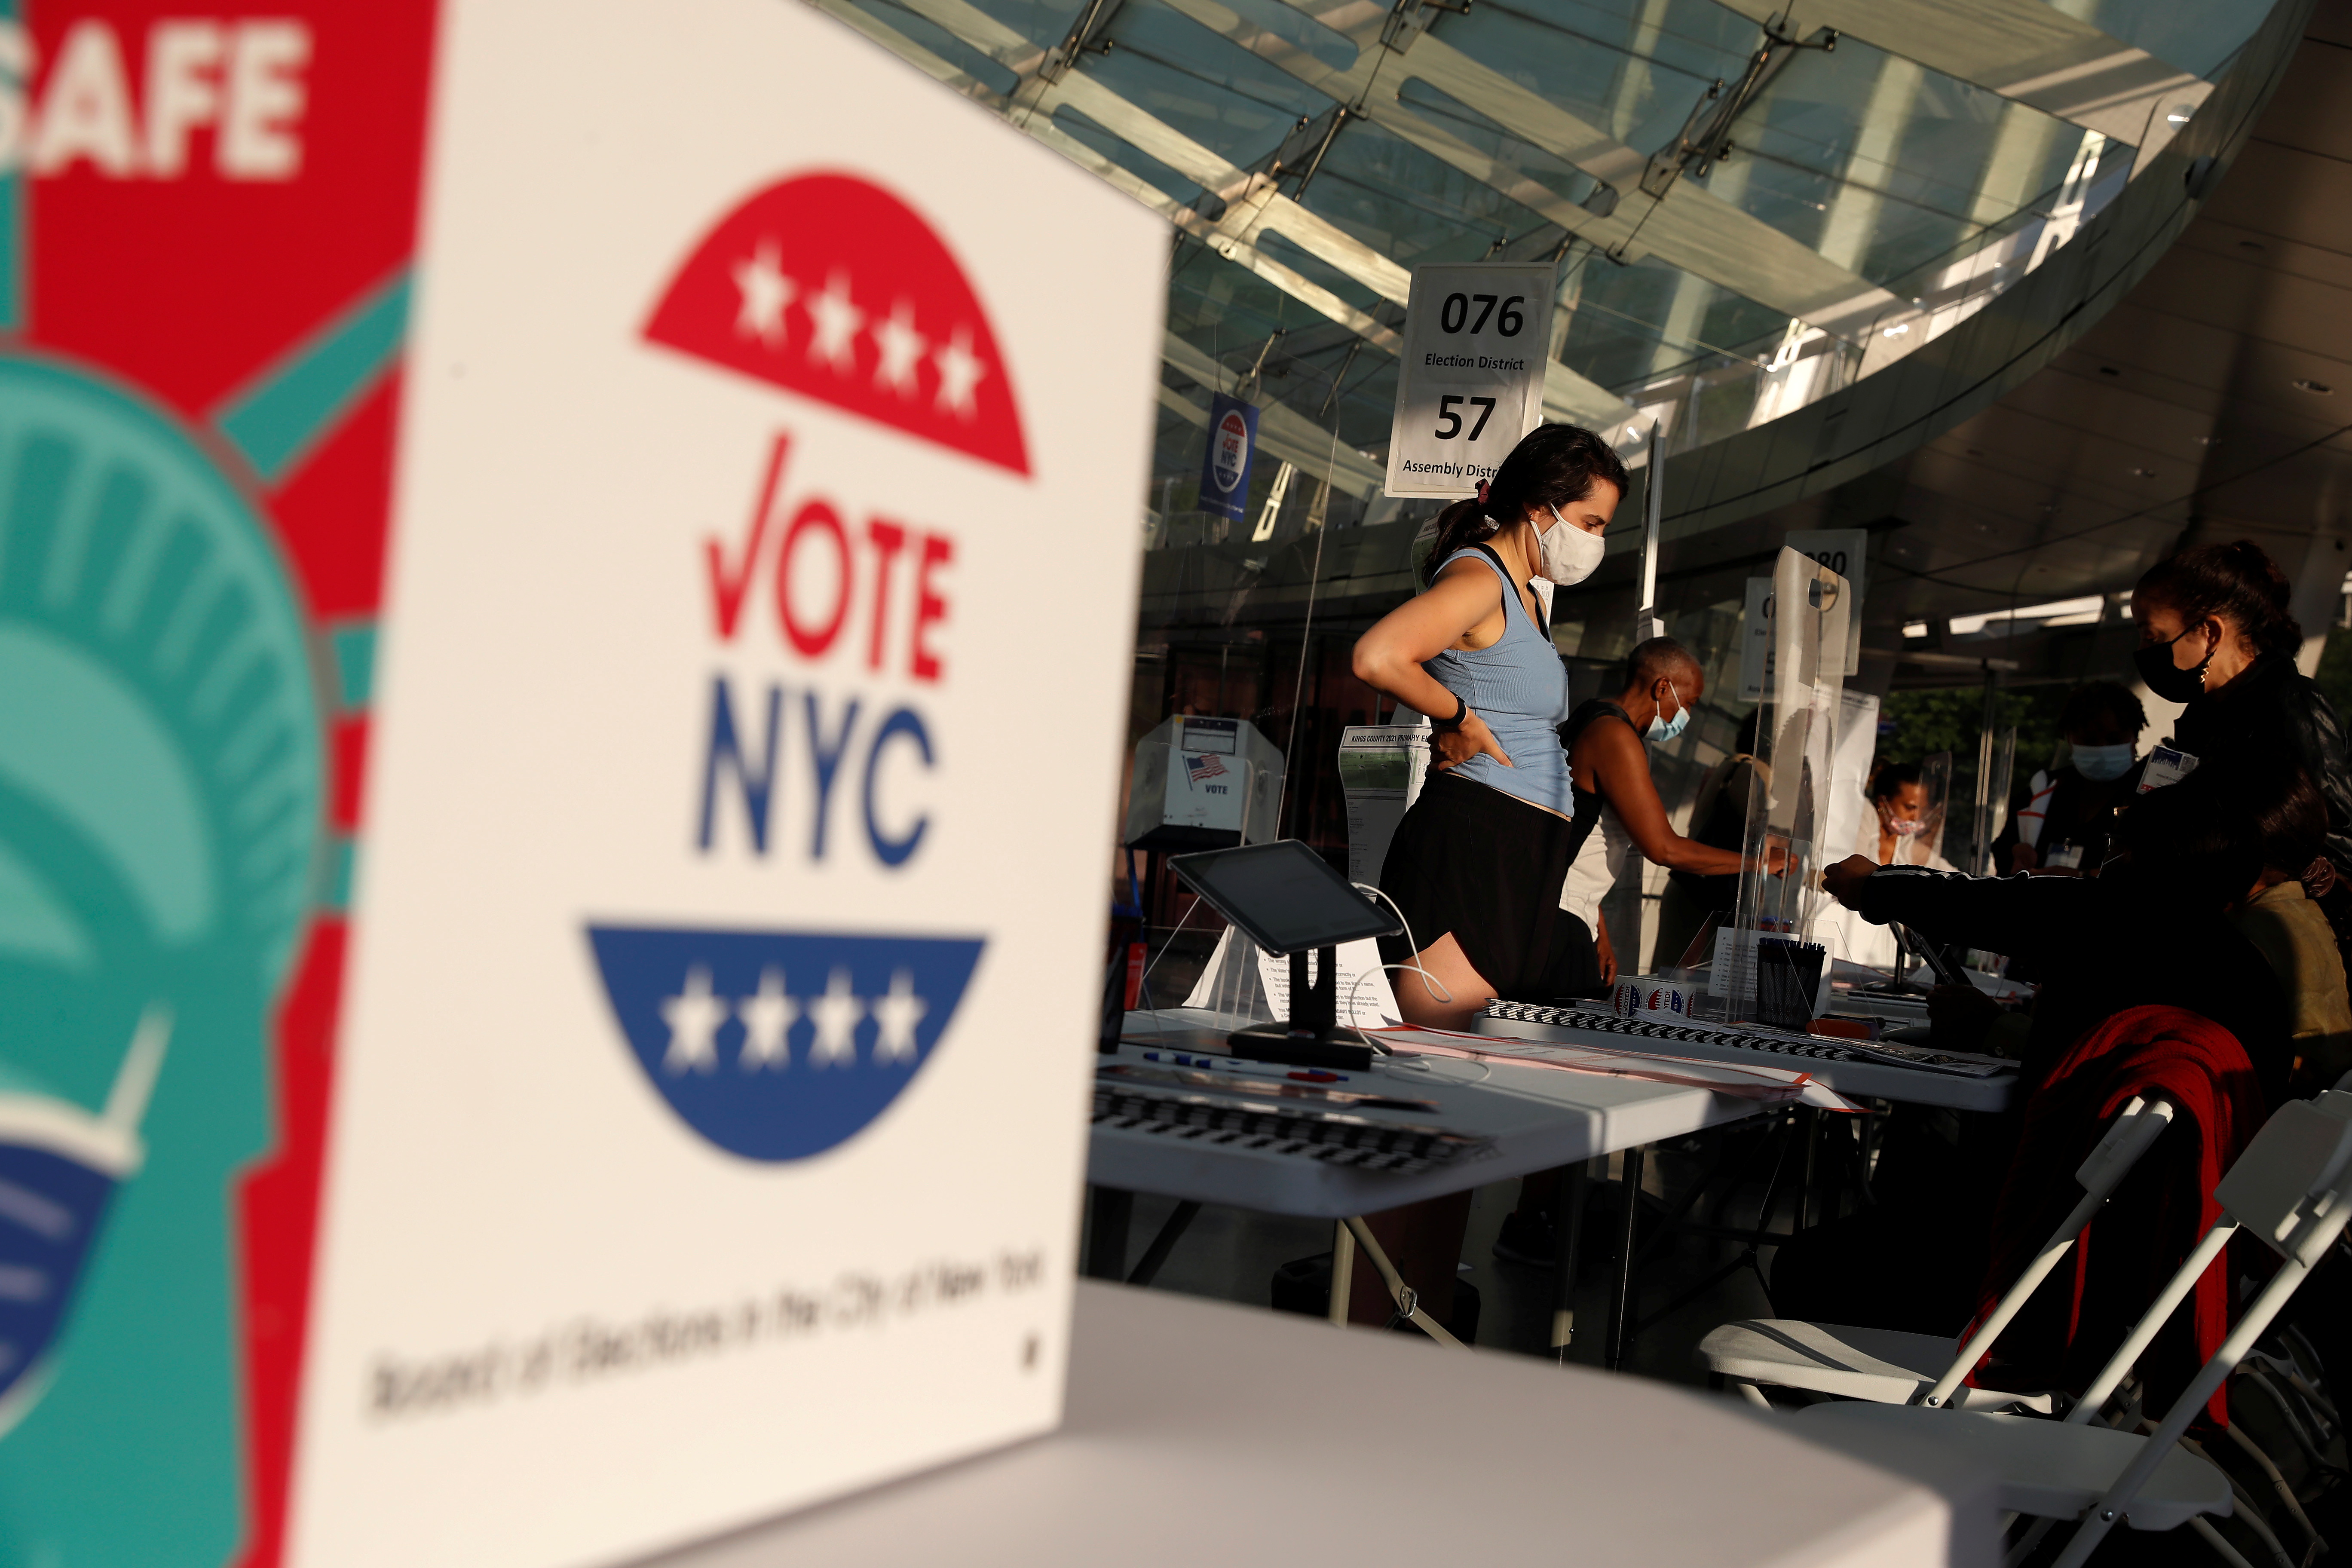 People wait to check in for voting in the New York Primary election at the Brooklyn Museum